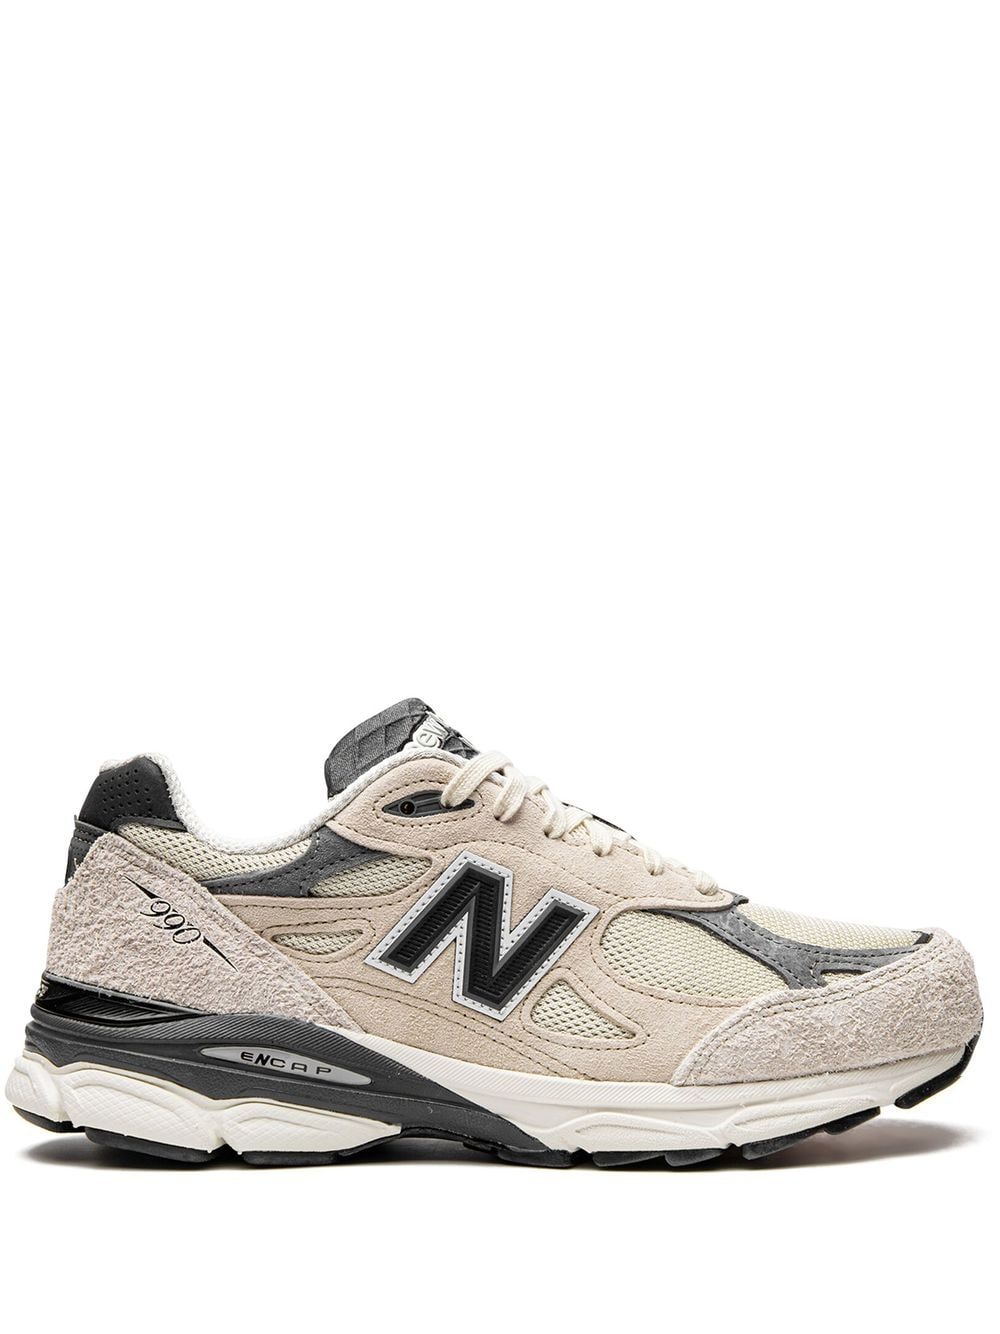 New Balance x Teddy Santis Made In USA 990v3 sneakers - Neutrals